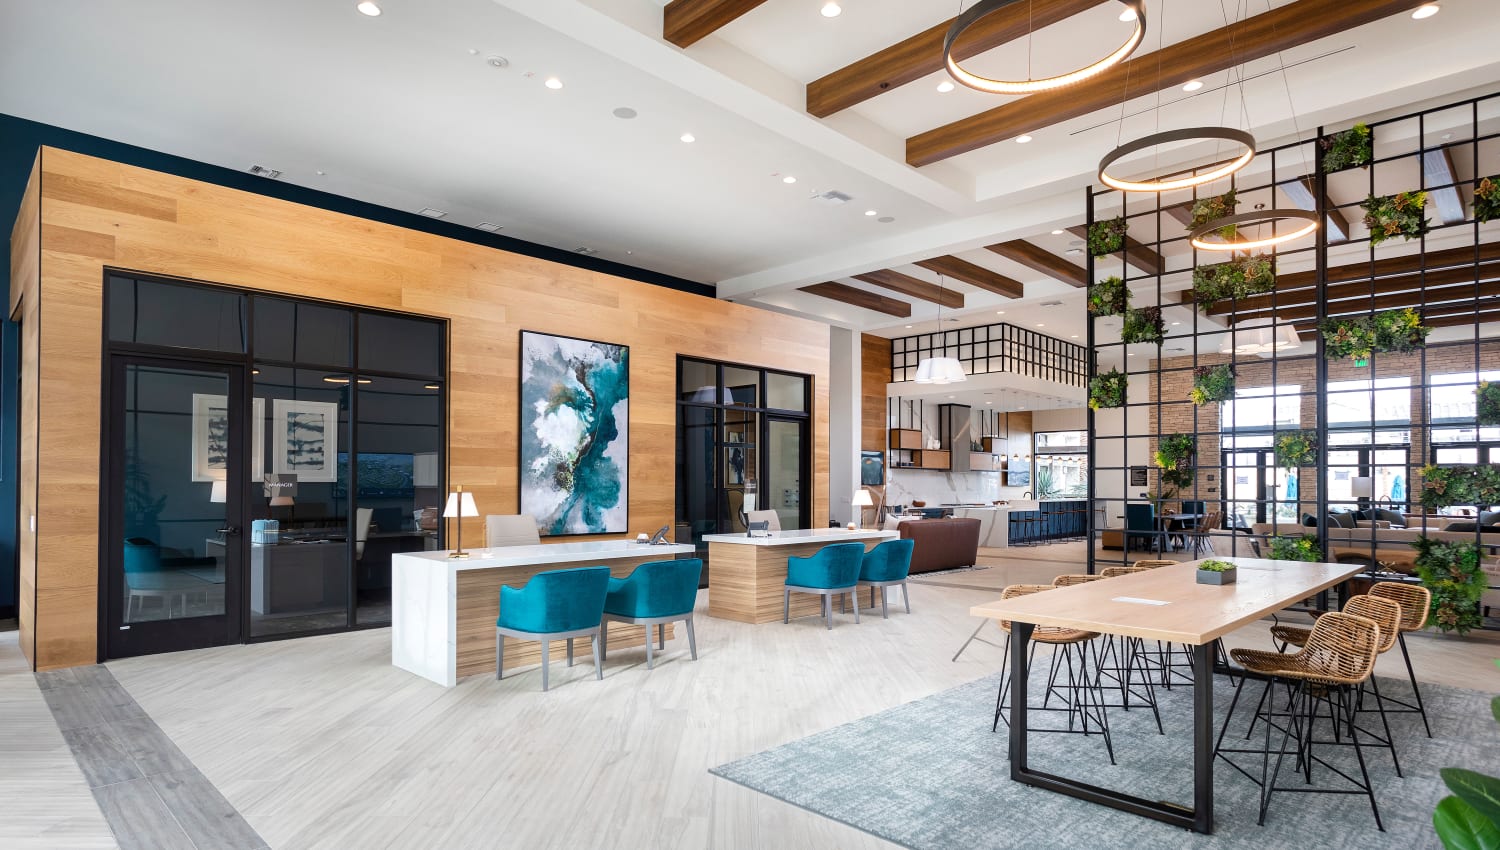 Leasing office leading into clubhouse at The Residences at Escaya in Chula Vista, California